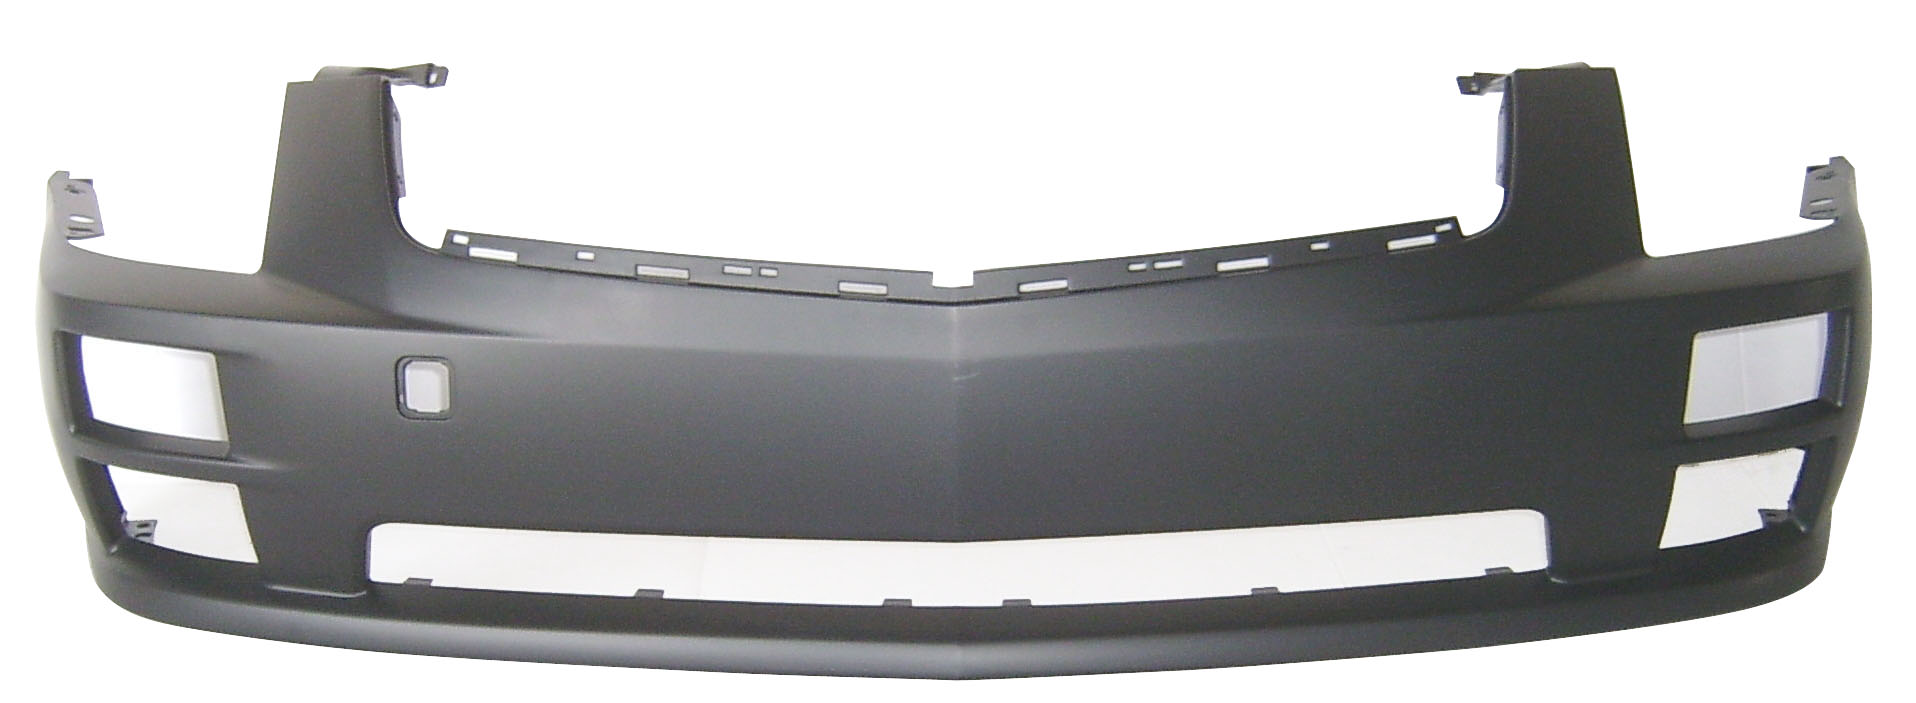 Aftermarket BUMPER COVERS for CADILLAC - STS, STS,05-07,Front bumper cover